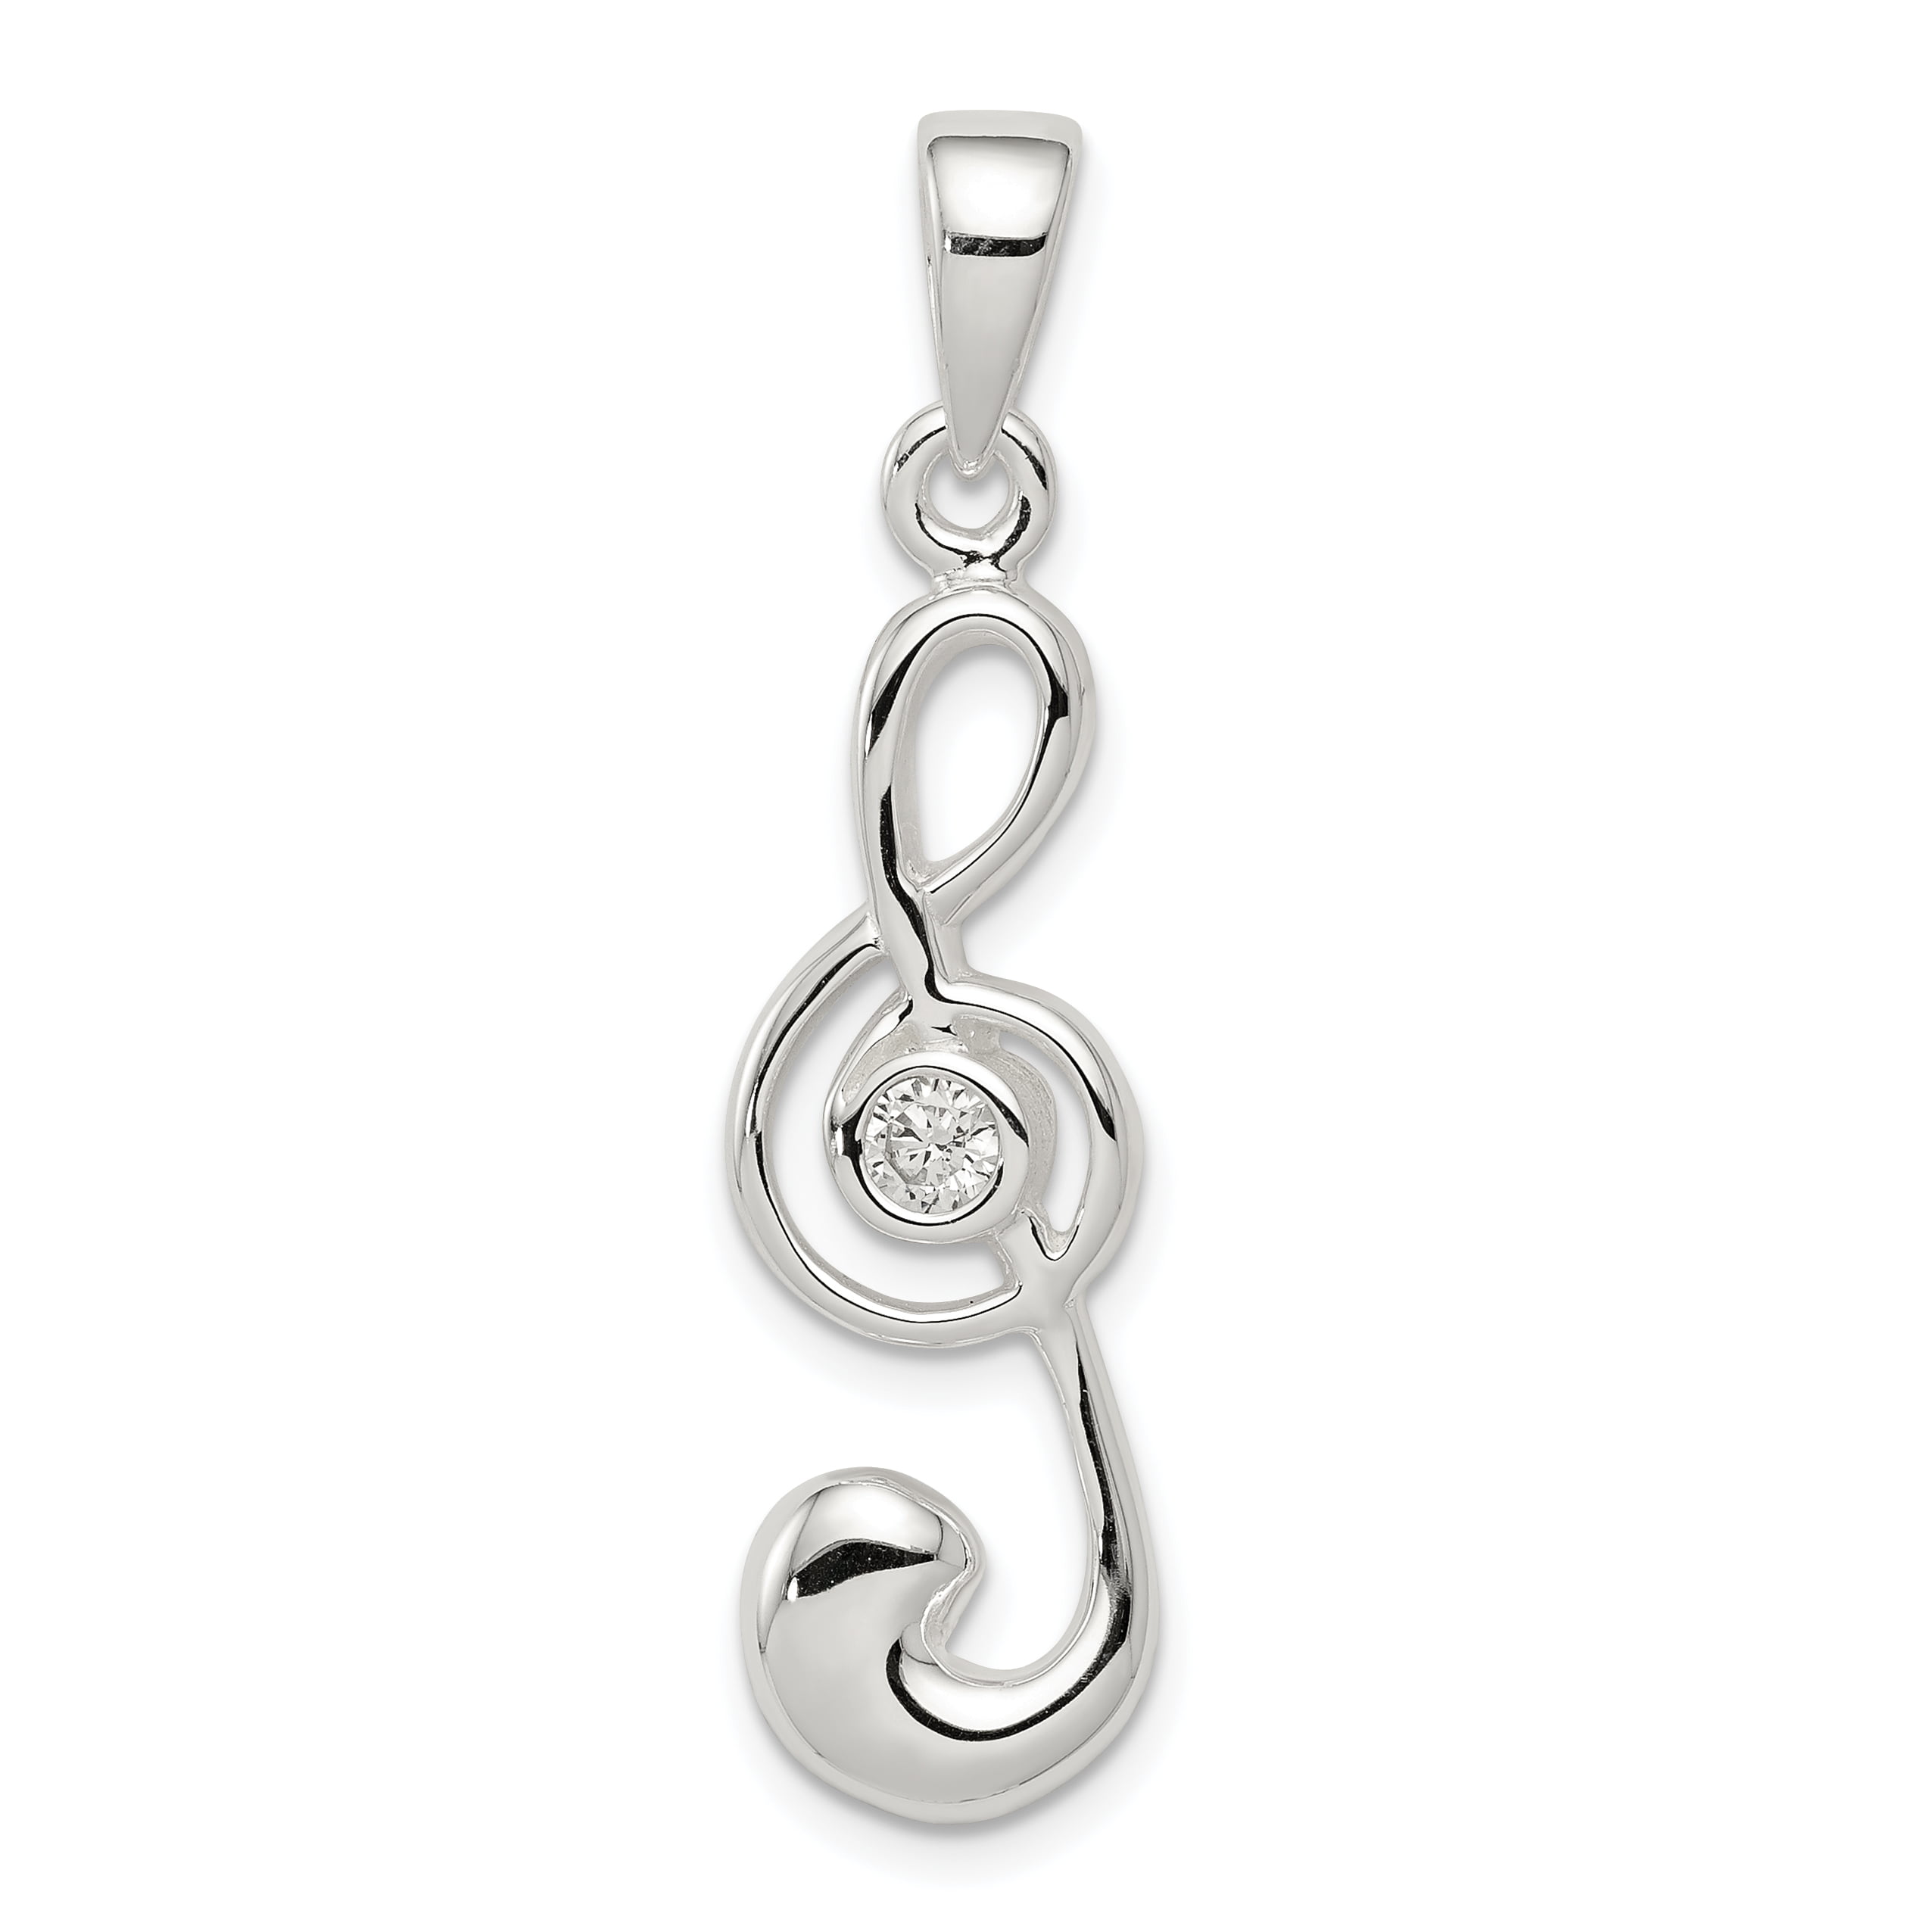 925 Sterling Silver Musical Treble Clef Pendant and Chain Necklace Gift Boxed